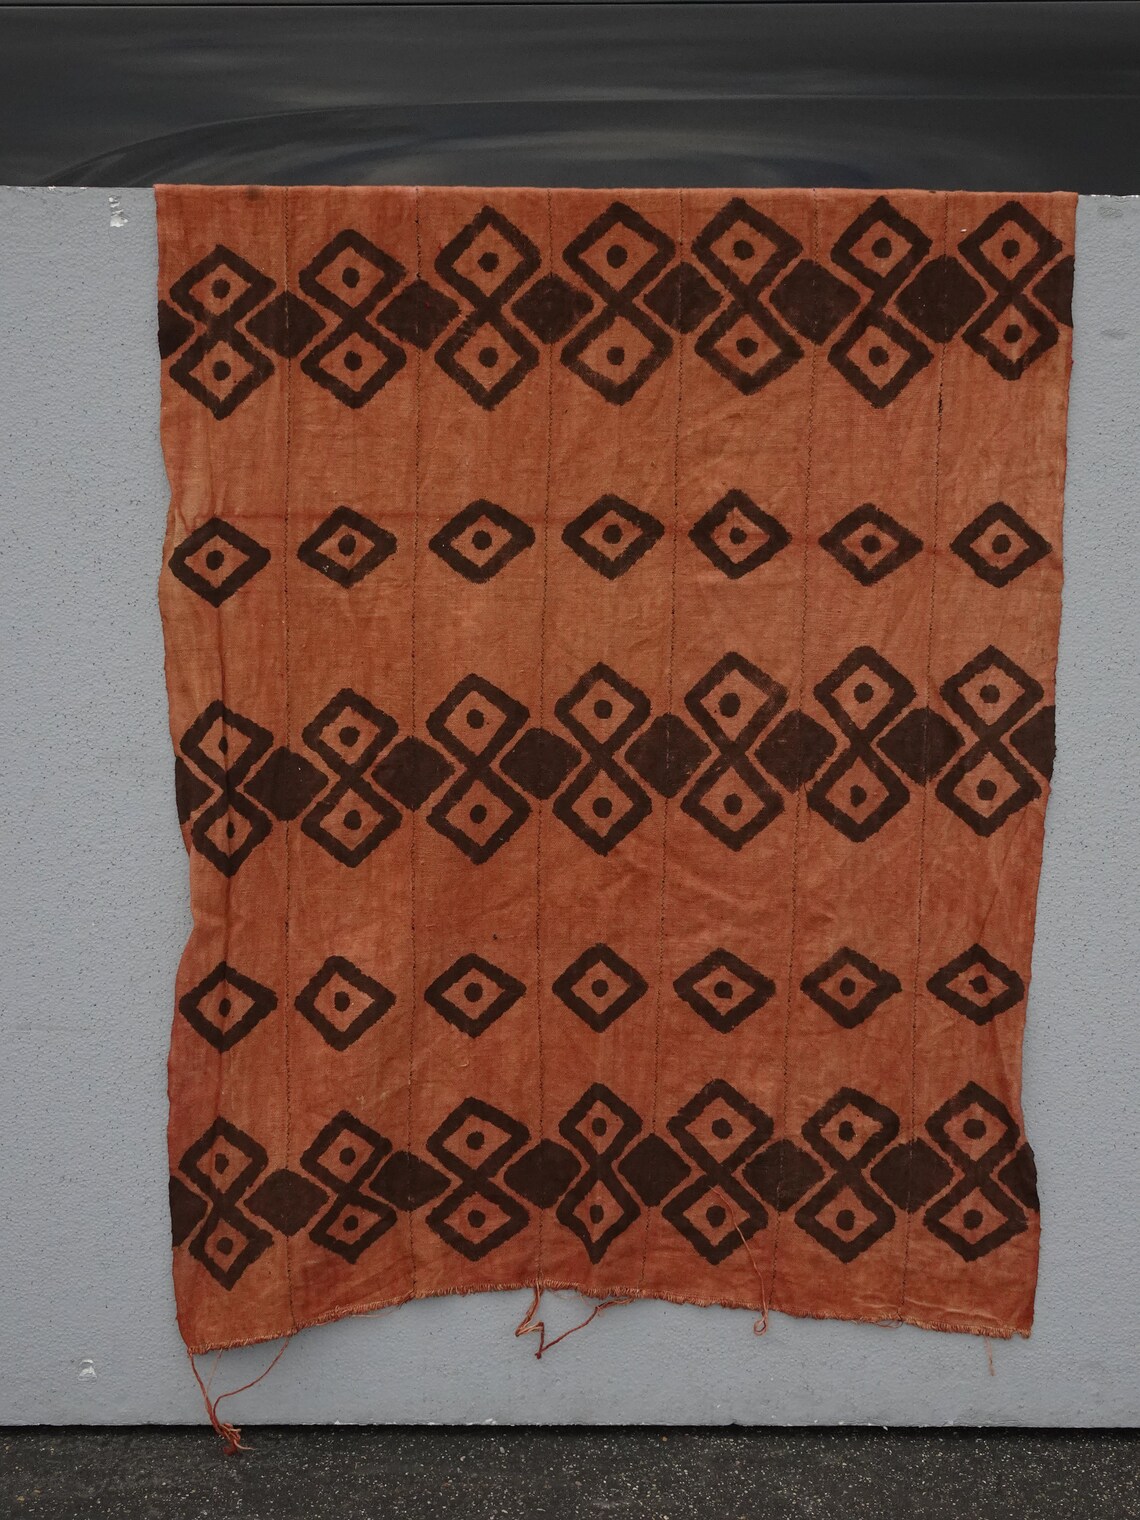 Vintage Cuba Cloth Cuba Linen Cloth African Style Hand Painted - Etsy